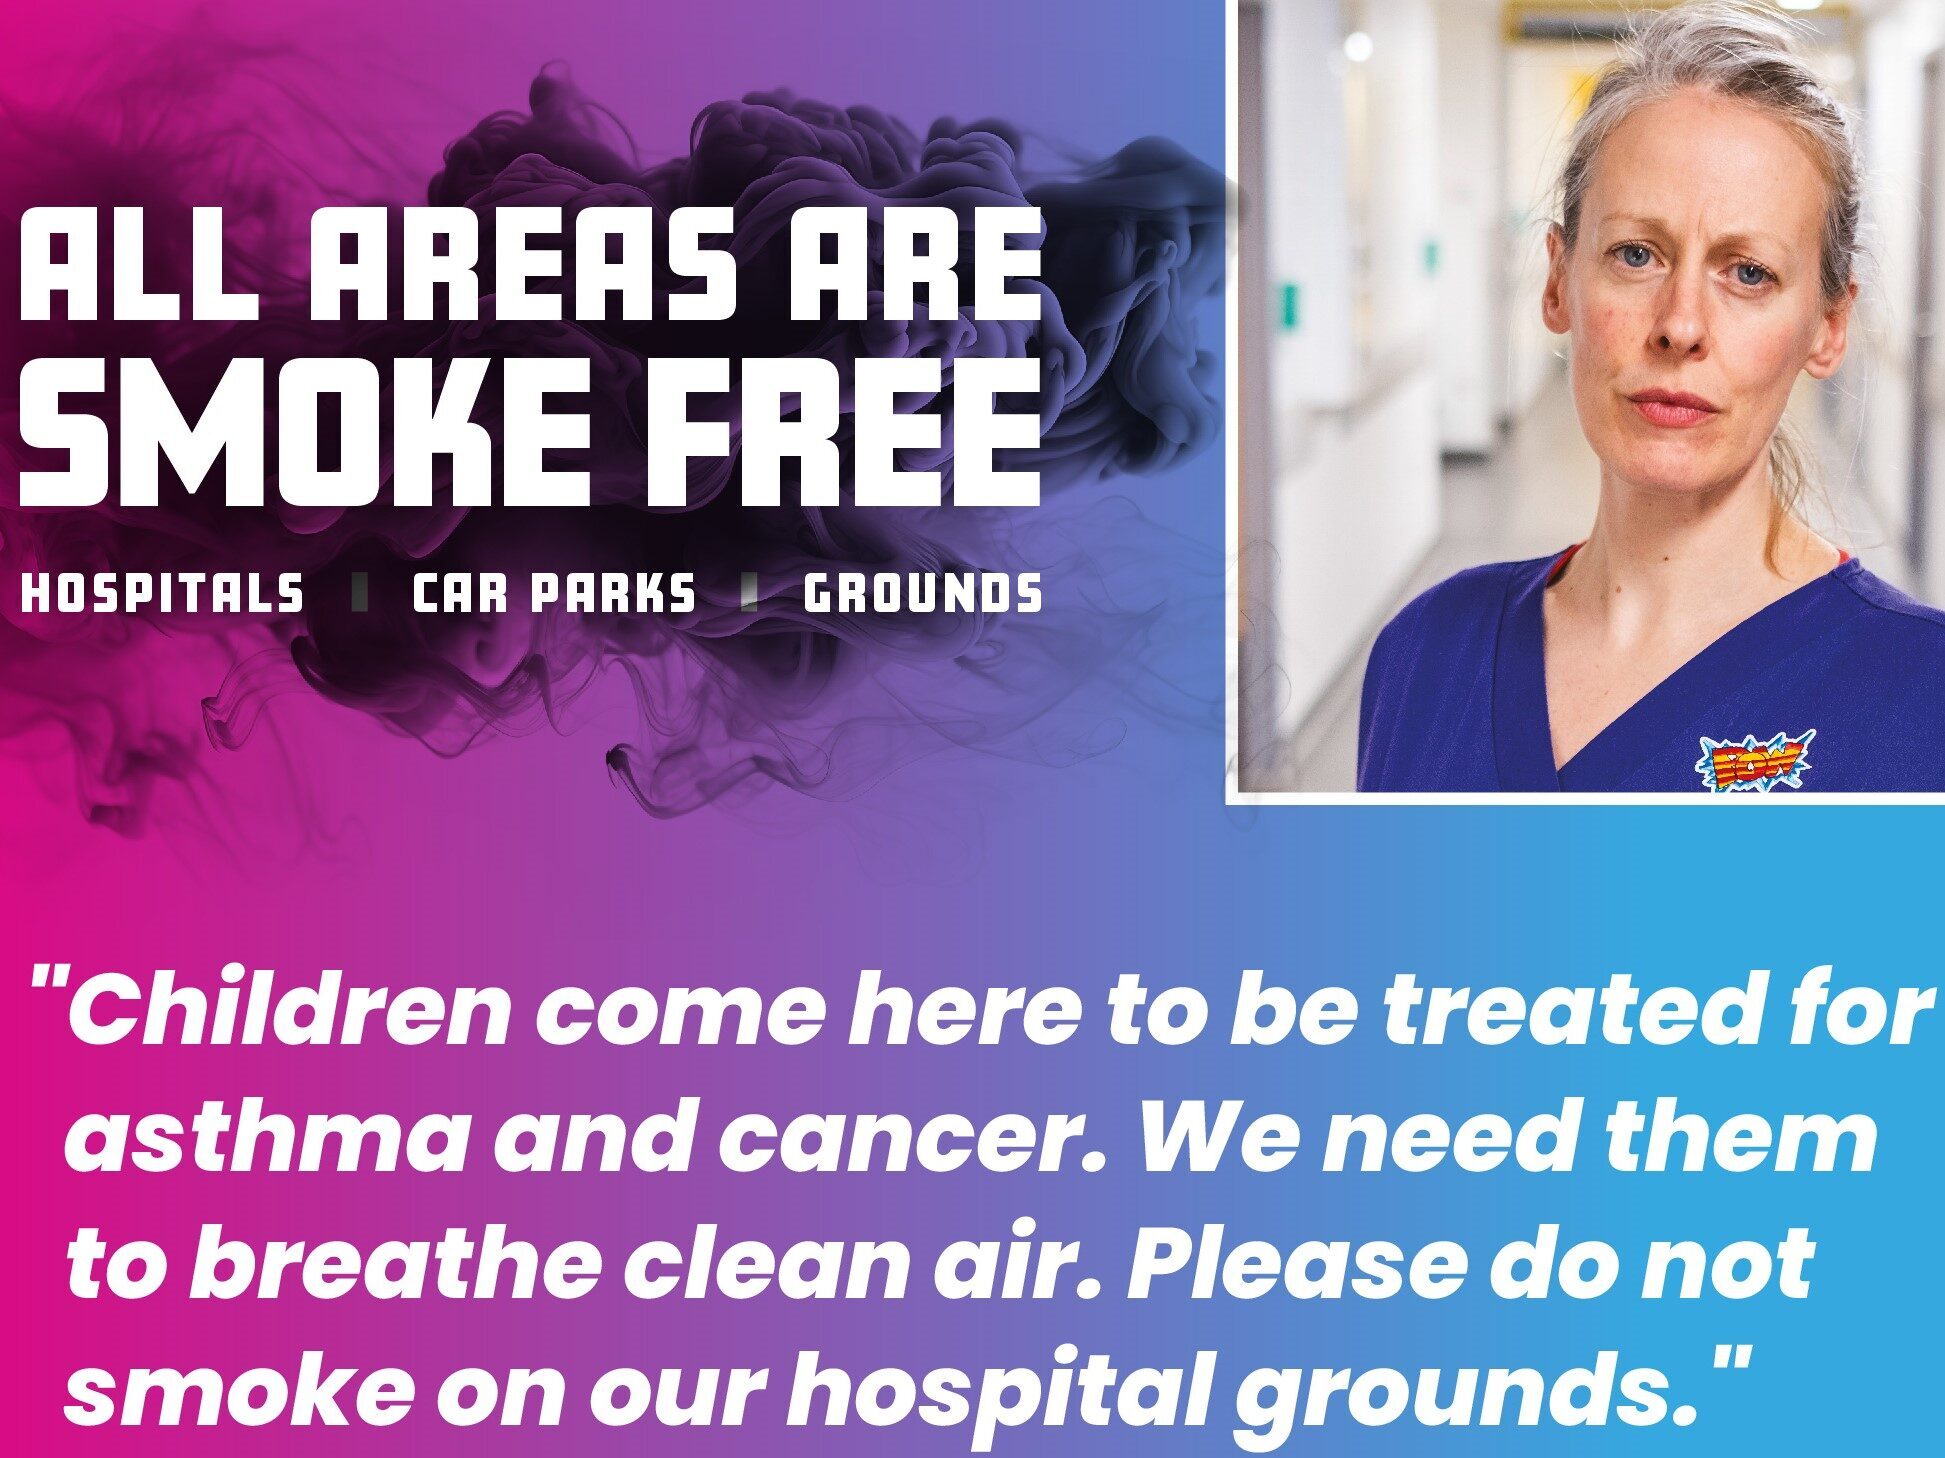 NHS Lothian Launches Striking Campaign to Stub Out Smoking on Hospital Sites